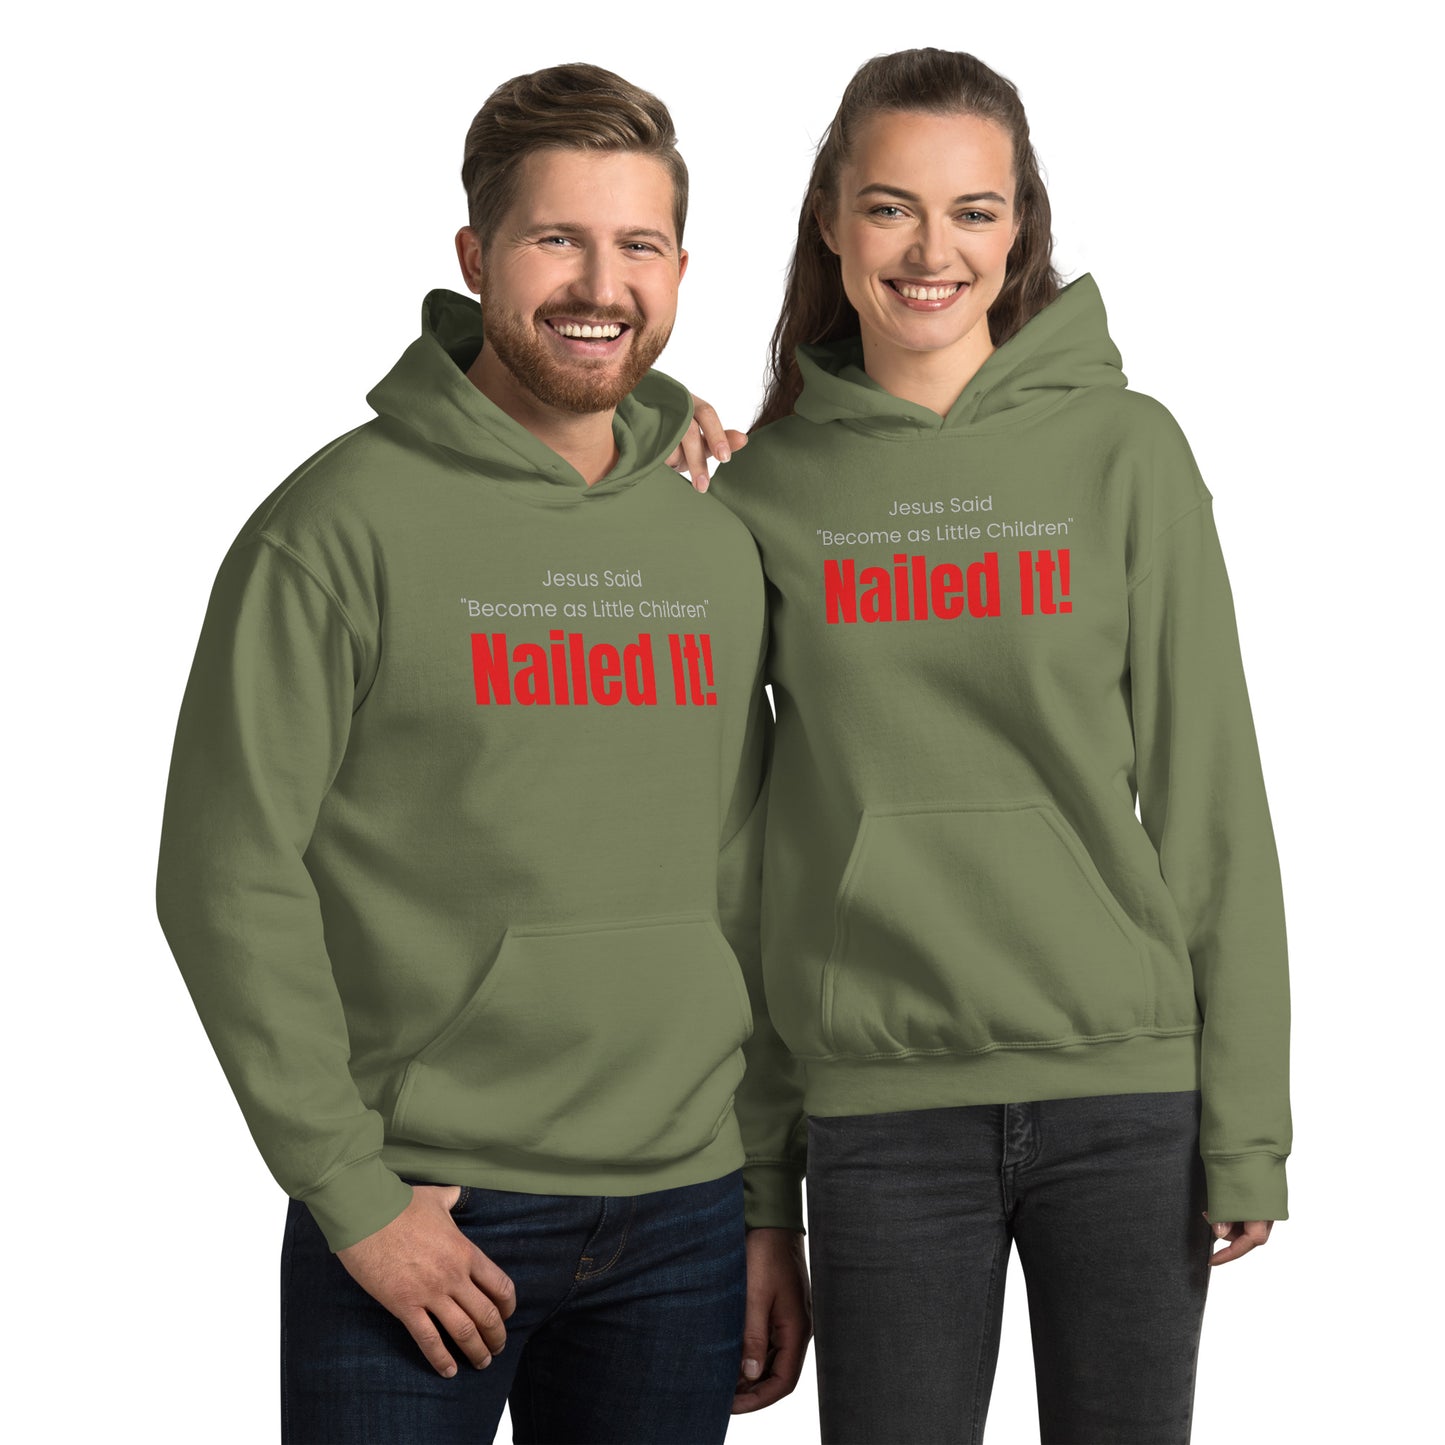 Jesus Said Become as Little Children NAILED IT Unisex Hoodie